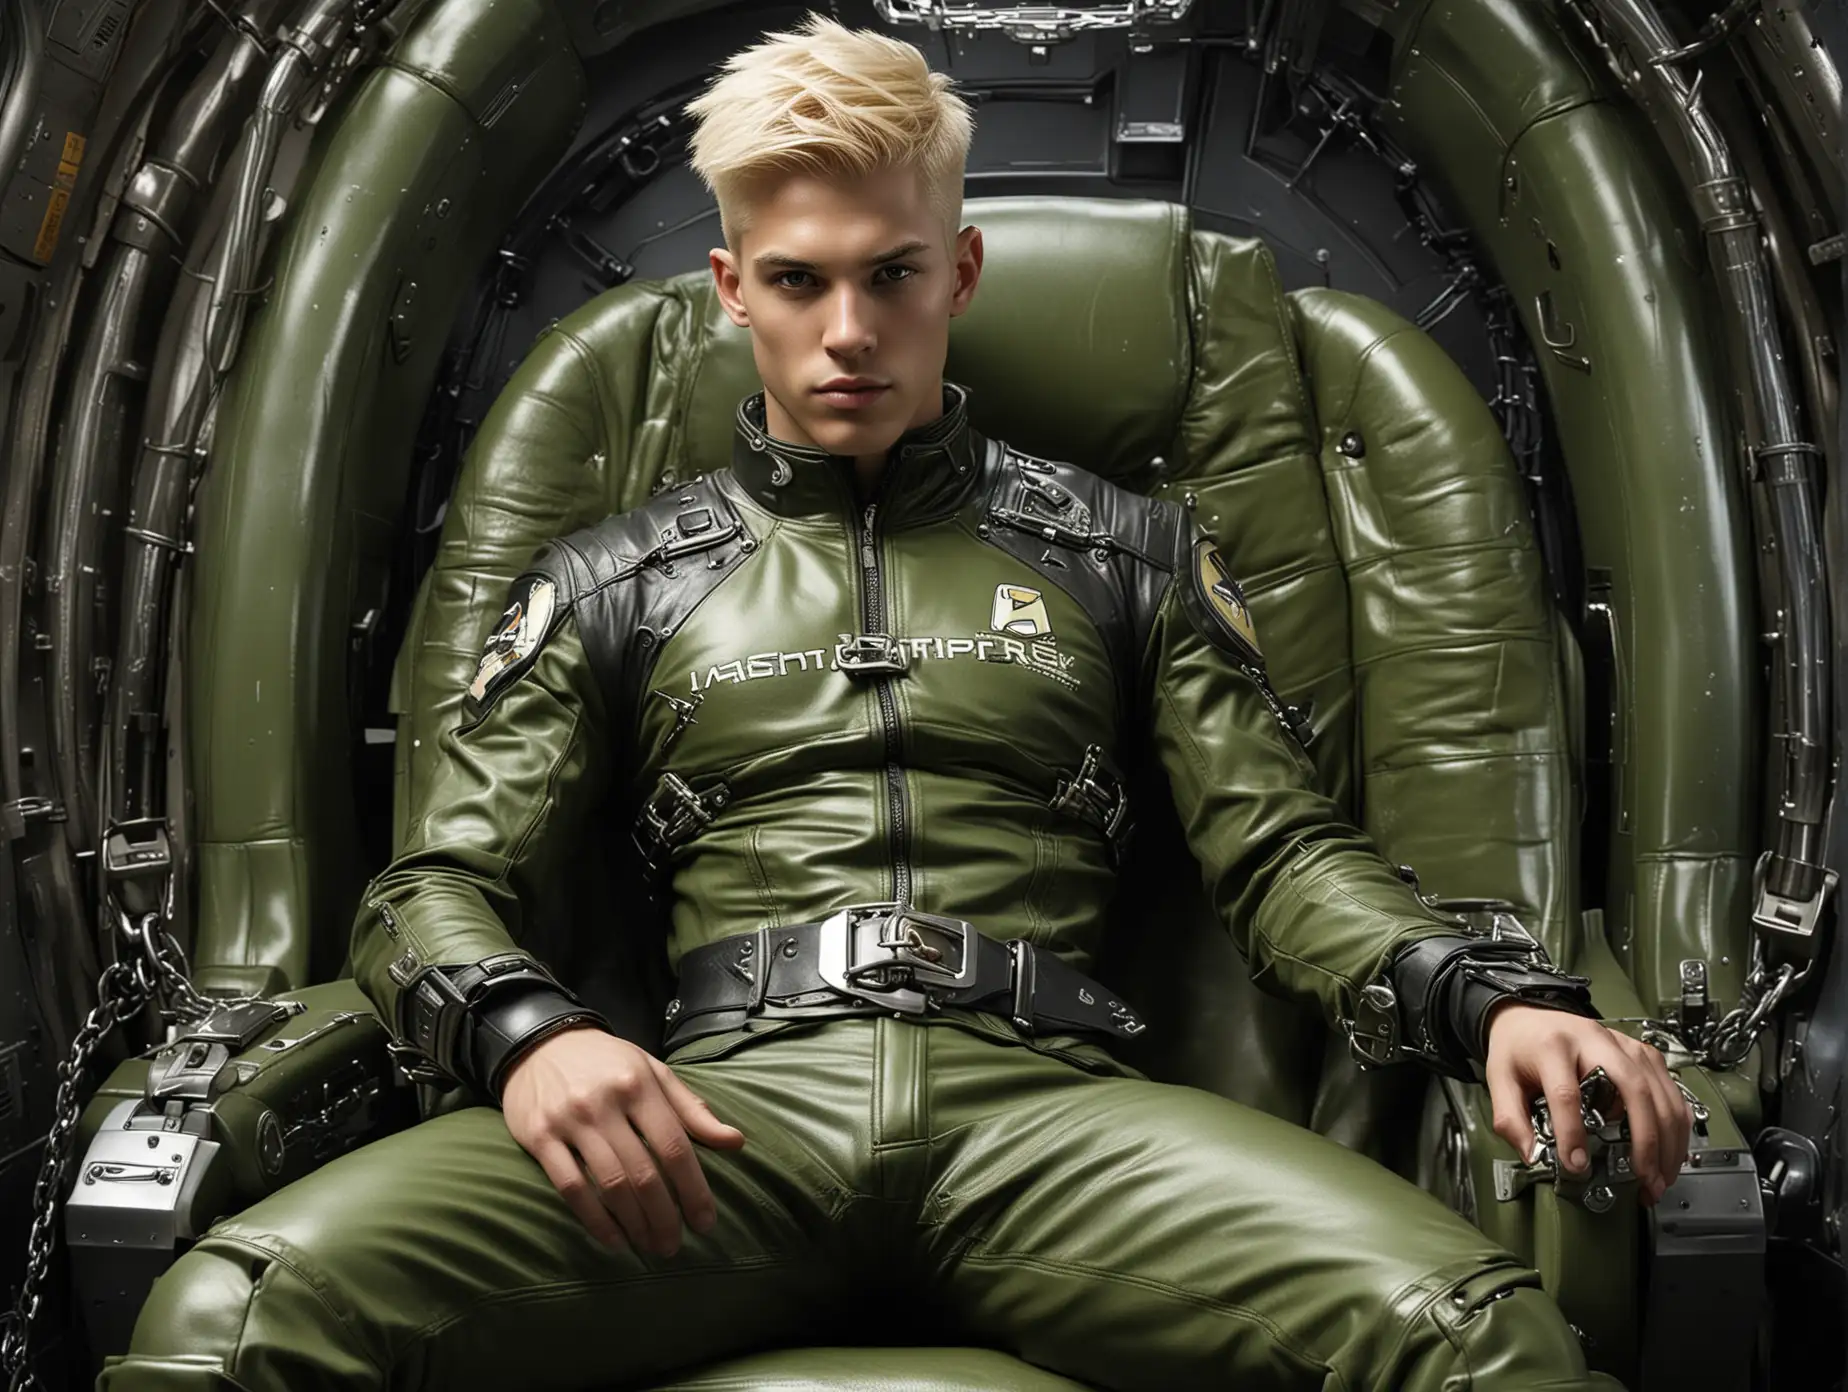 Image of muscular Young man, with bleached blonde hair, in tight form enhancing olive-green leather space cadet uniform, chains and buckles details, enhancing groin bulge, futuristic logo on chest,  harnessed to a black-leather reclined seat,  inside of a spacecraft in a cyberpunk world,